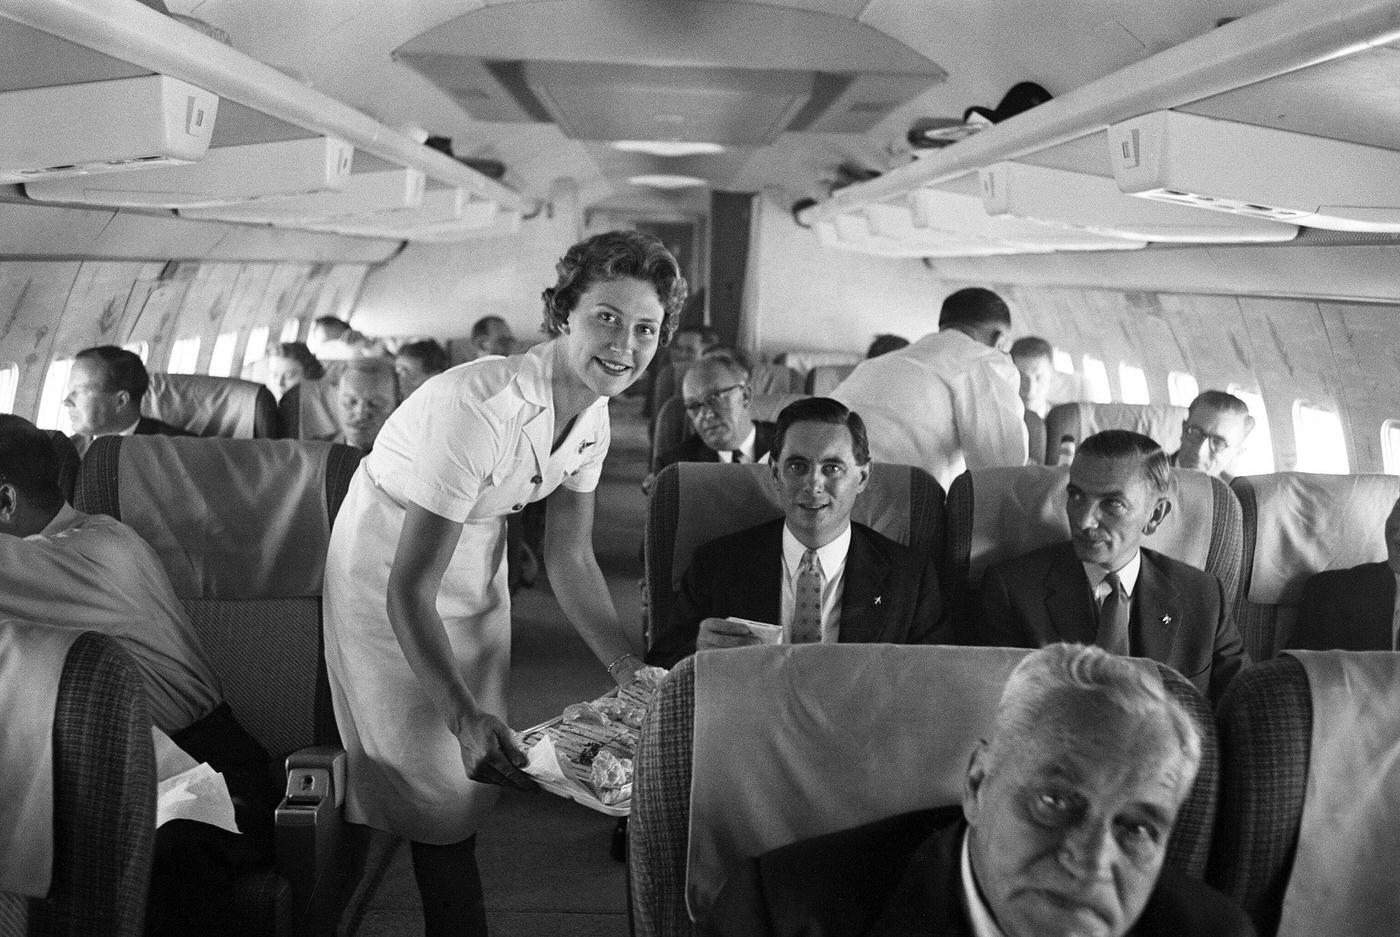 On August 7, 1959, an air stewardess serves food to passengers on board a Qantas Boeing 707 plane at London airport.